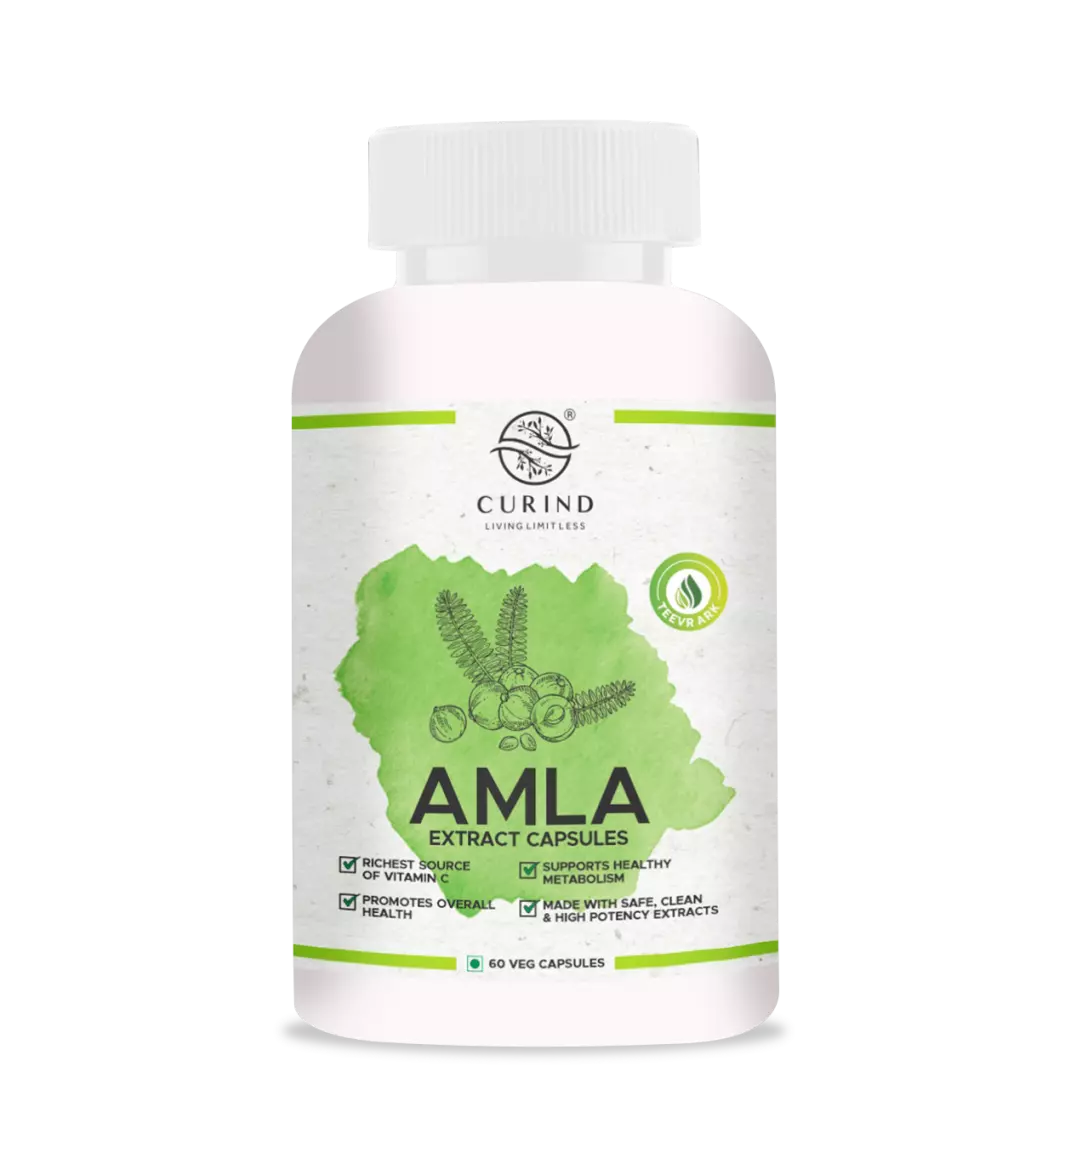 Amla Extract- rich source of vitamin c and support overall health